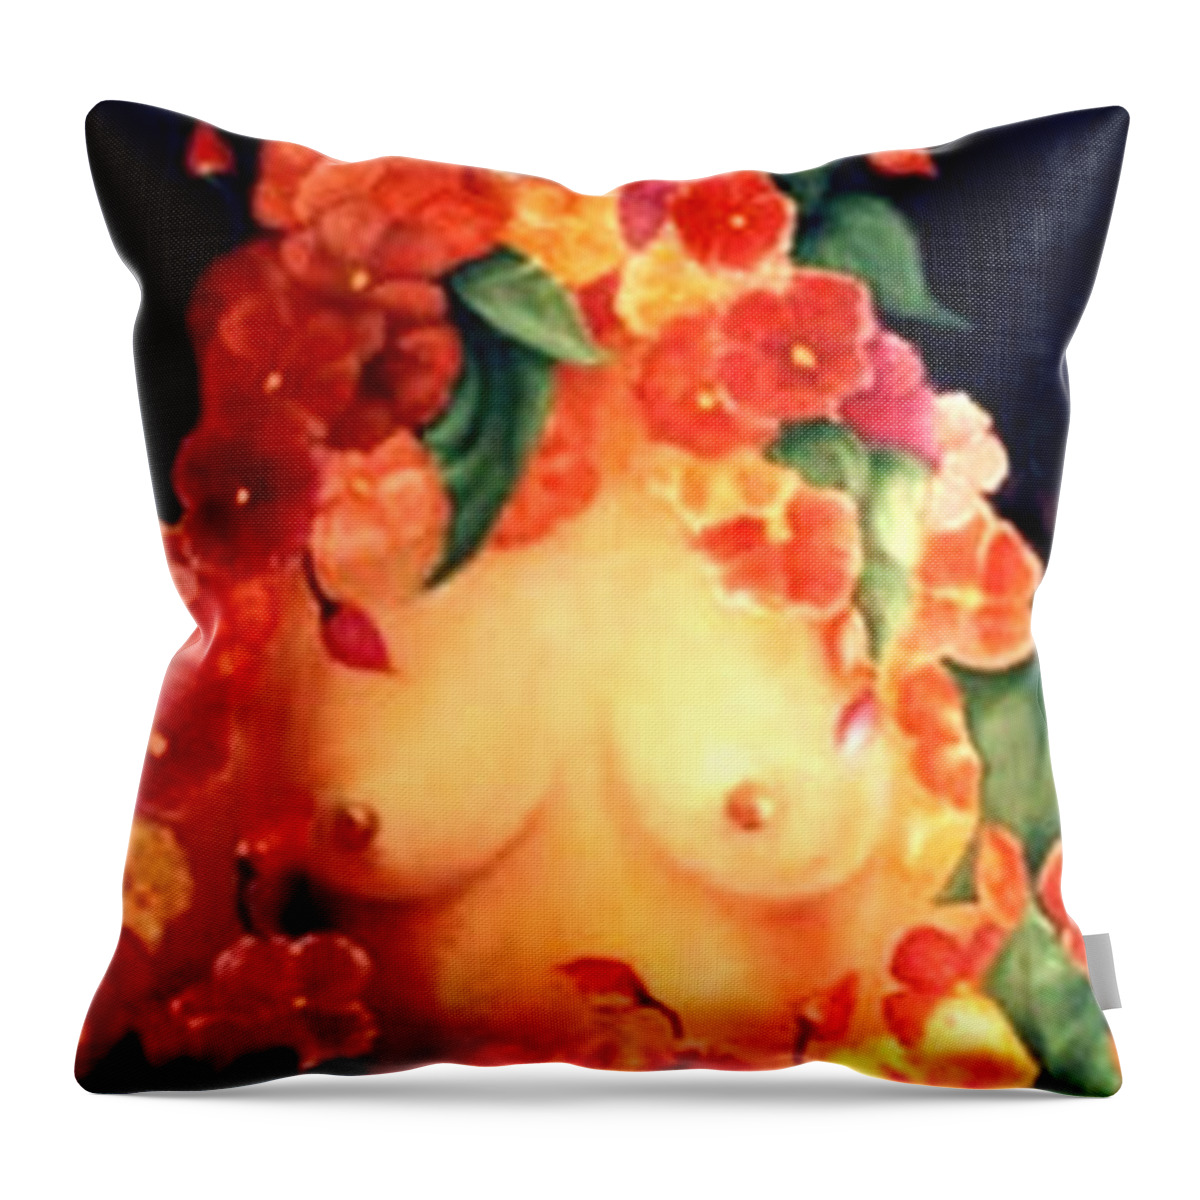  Throw Pillow featuring the painting Blooms by Jordana Sands